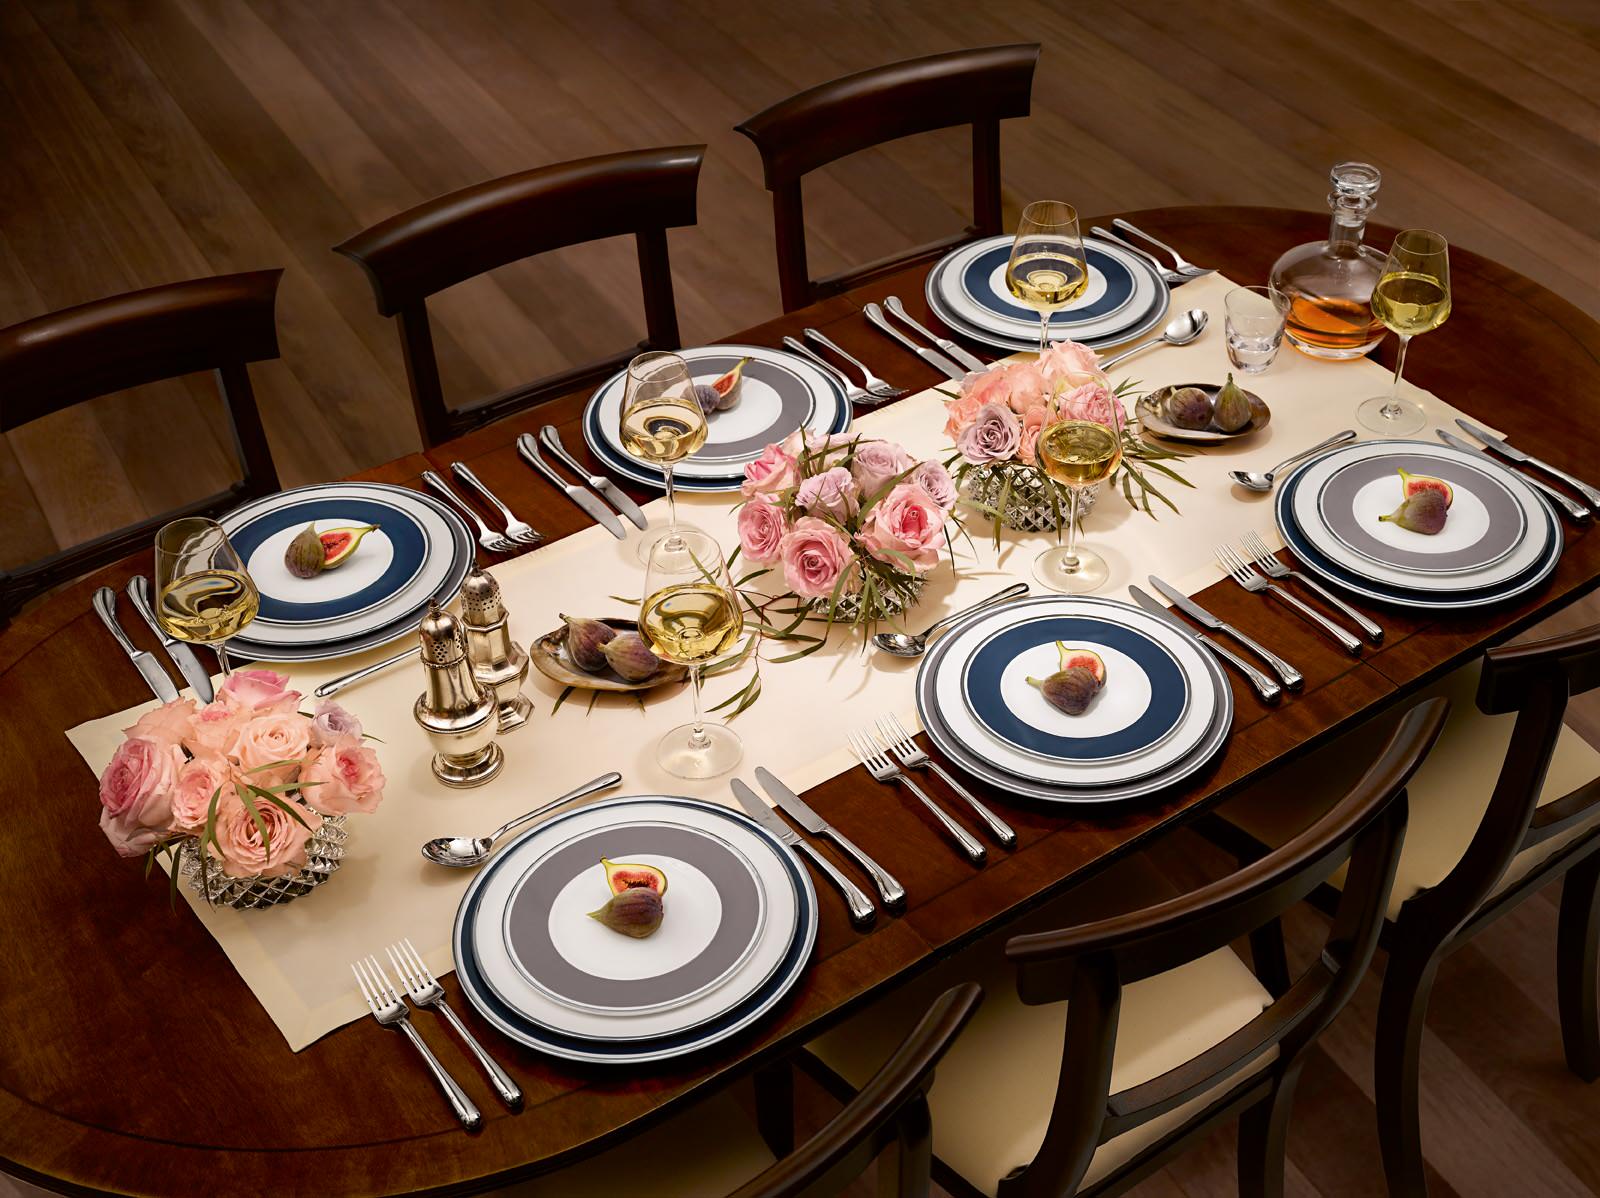 Villeroy & Boch Anmut my Colour Dinnerware - Contemporary - Dining Room -  New York - by Villeroy & Boch | Houzz